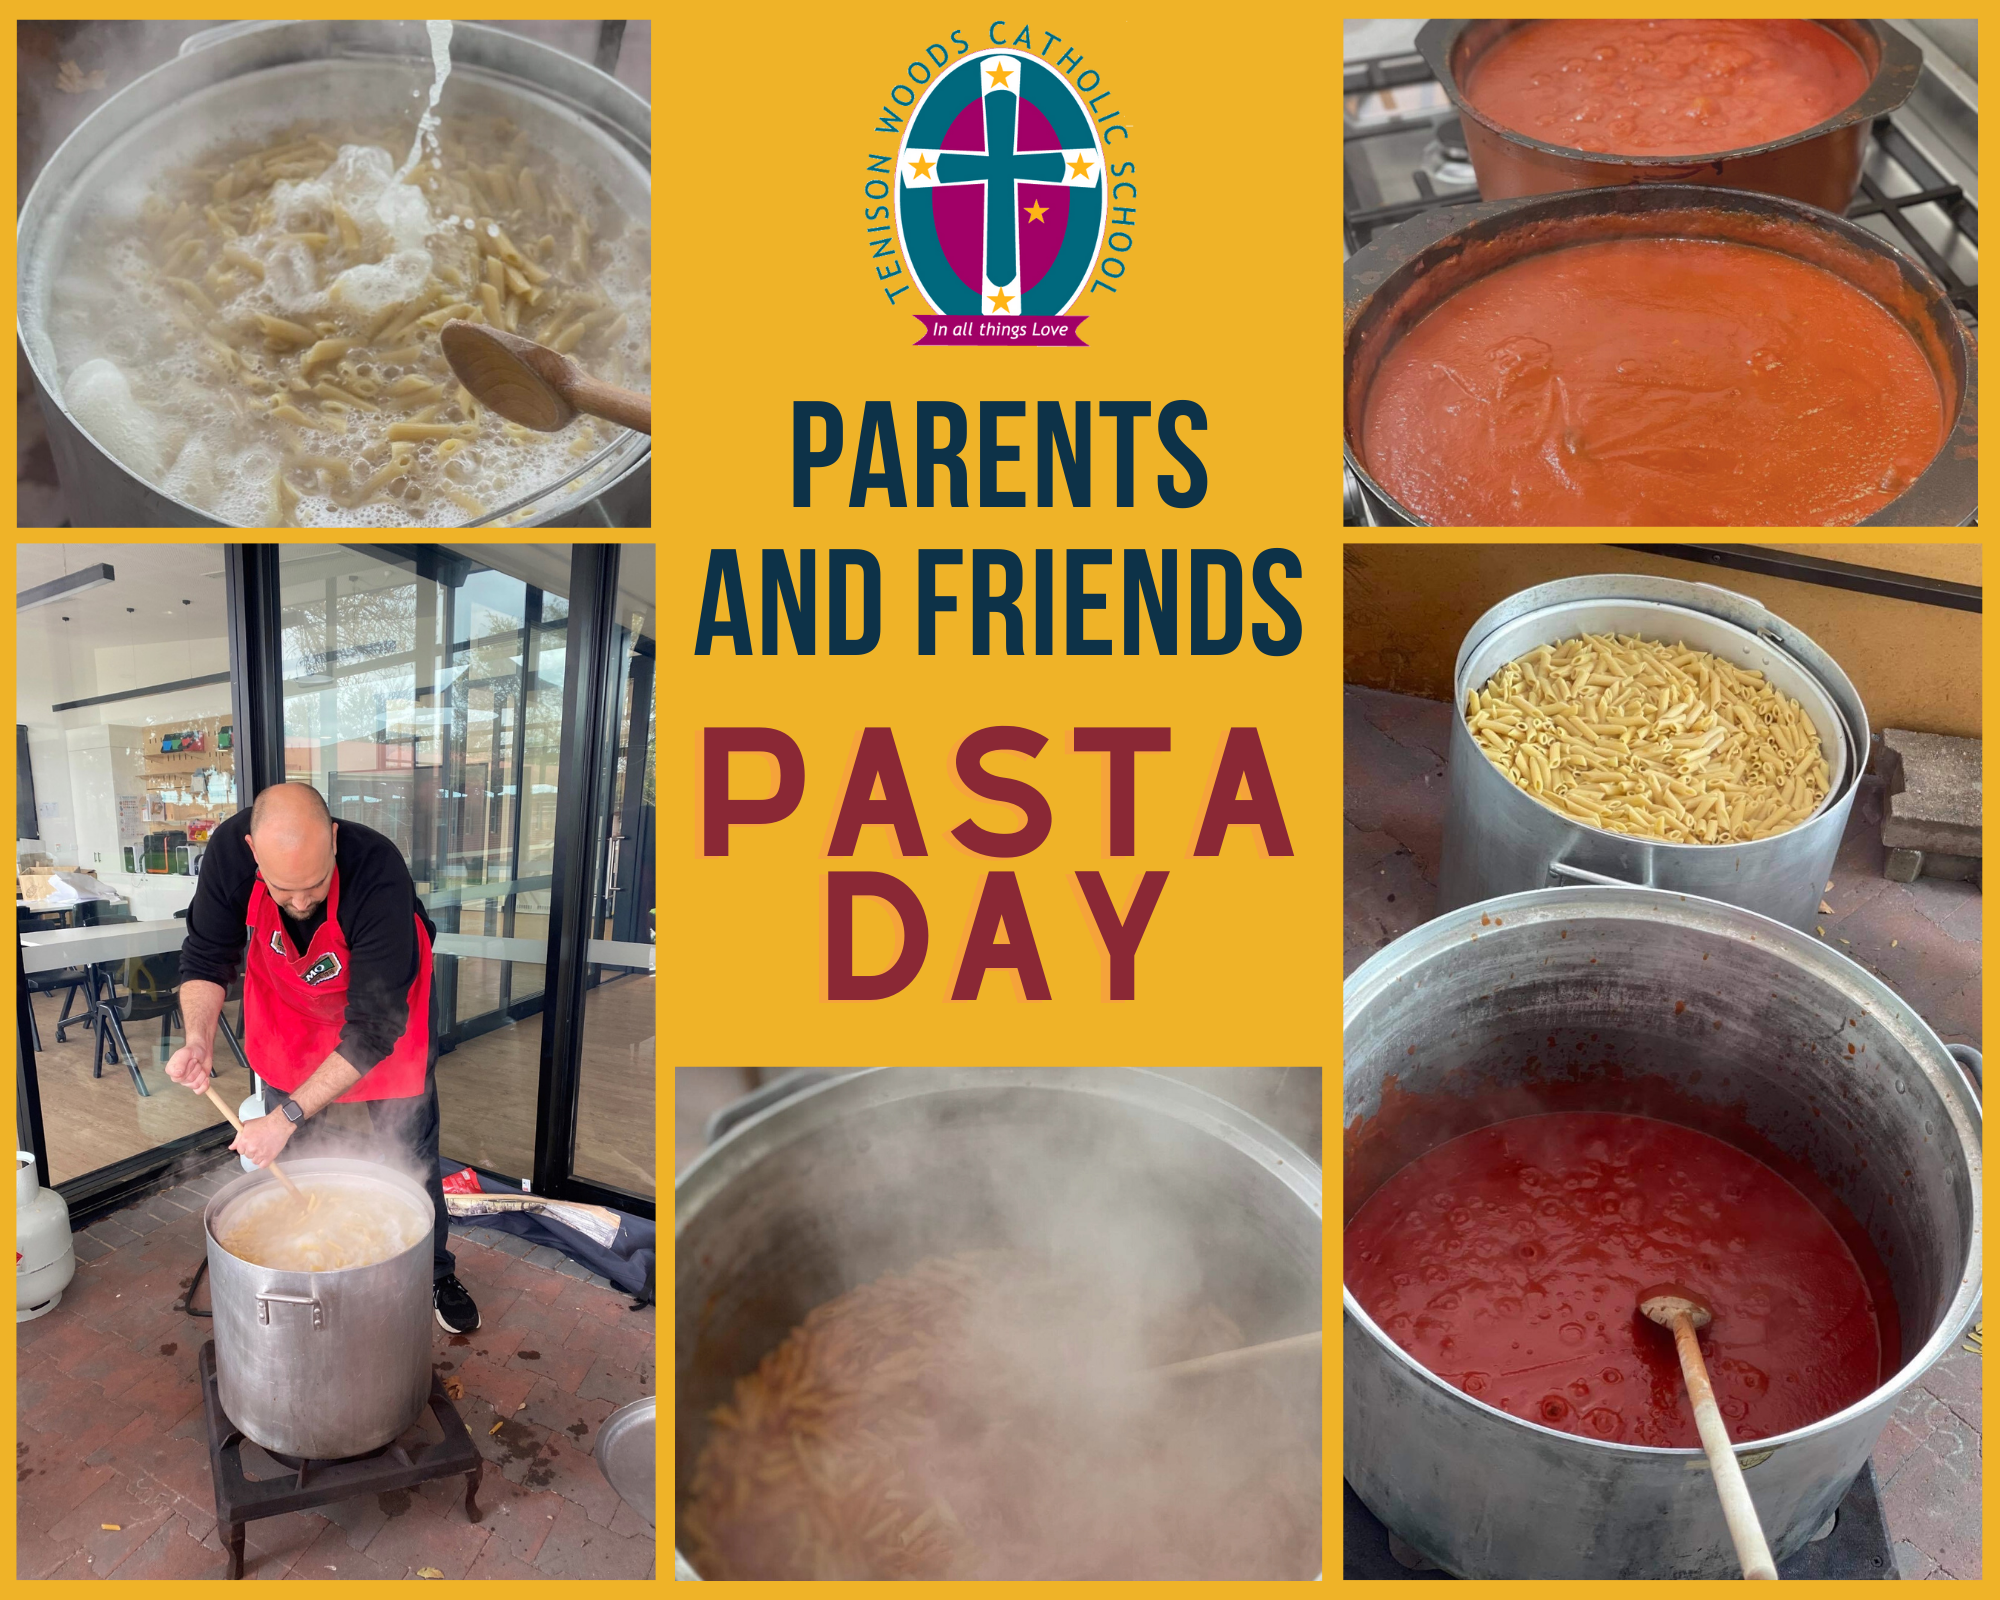 Parents and friends pasta day.png